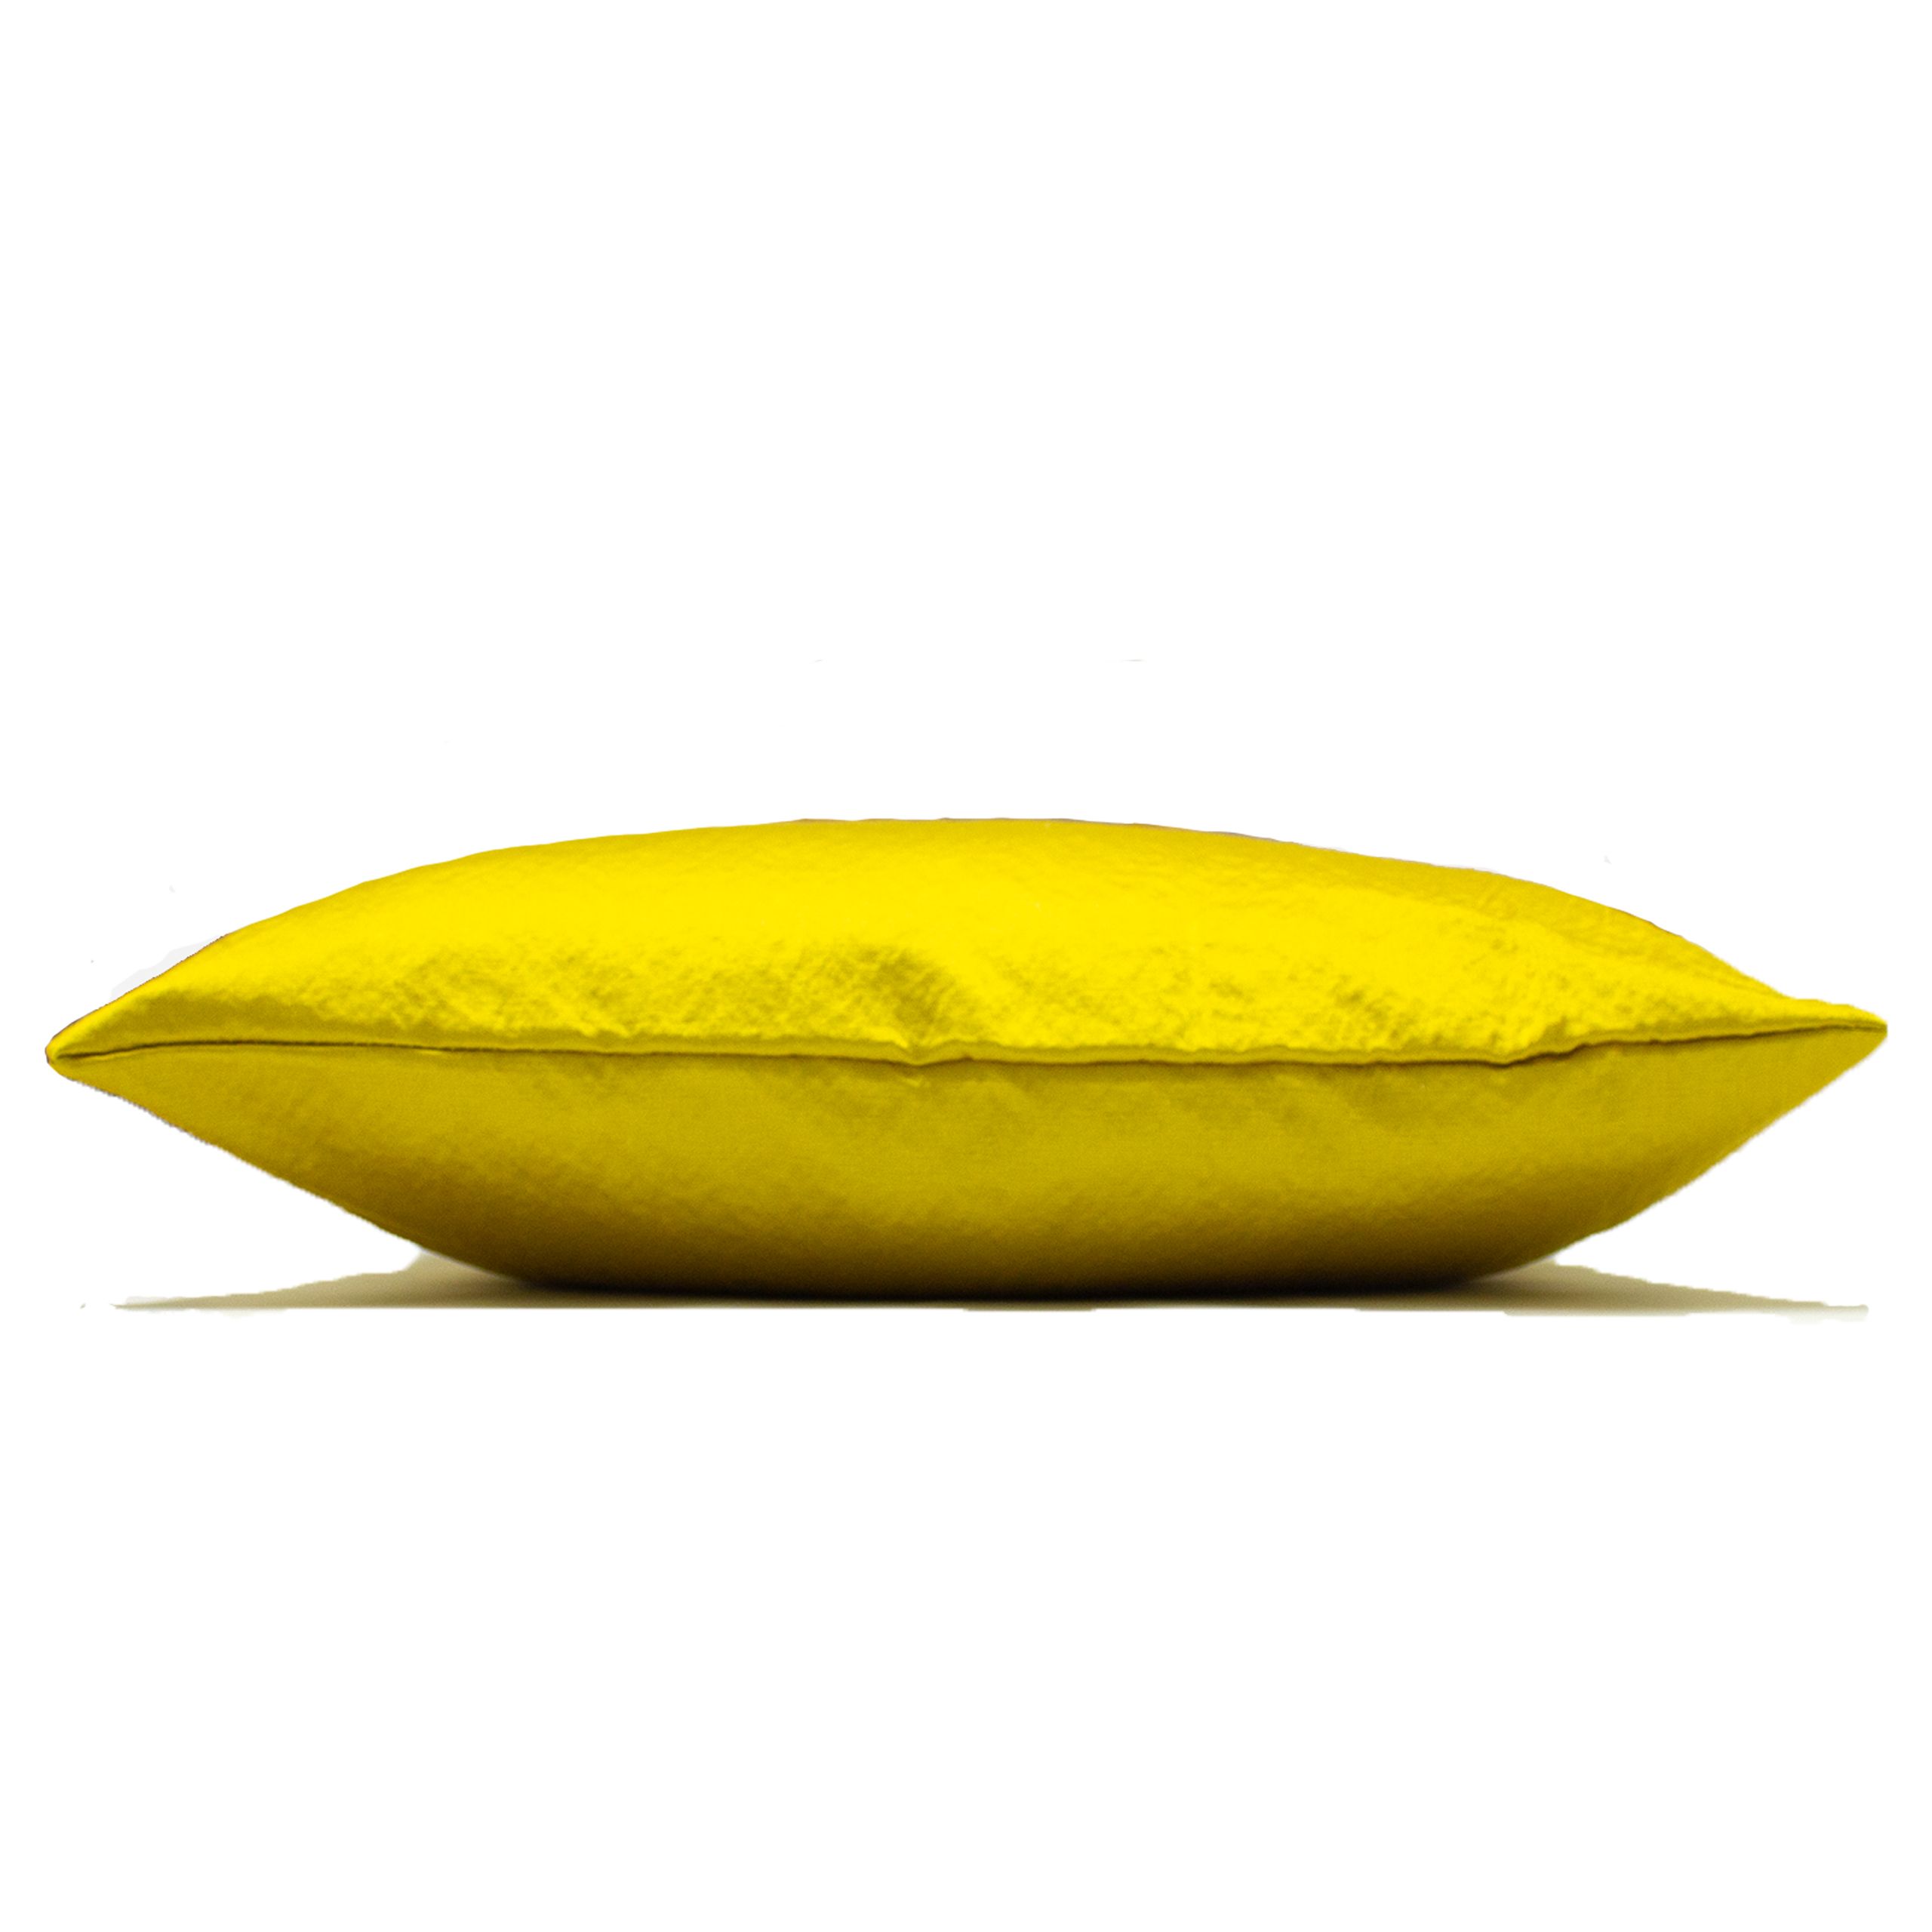 Summery and tropical - this cushion has a vibrant personality that will work in a range of home interior styles. The soft silk-like appearance screams sophistication and luxury with a metallic sheen as well as gold reflects within the fabric. The bright colour palette will give your décor a sense of vitality and lusciousness filled with freshness.